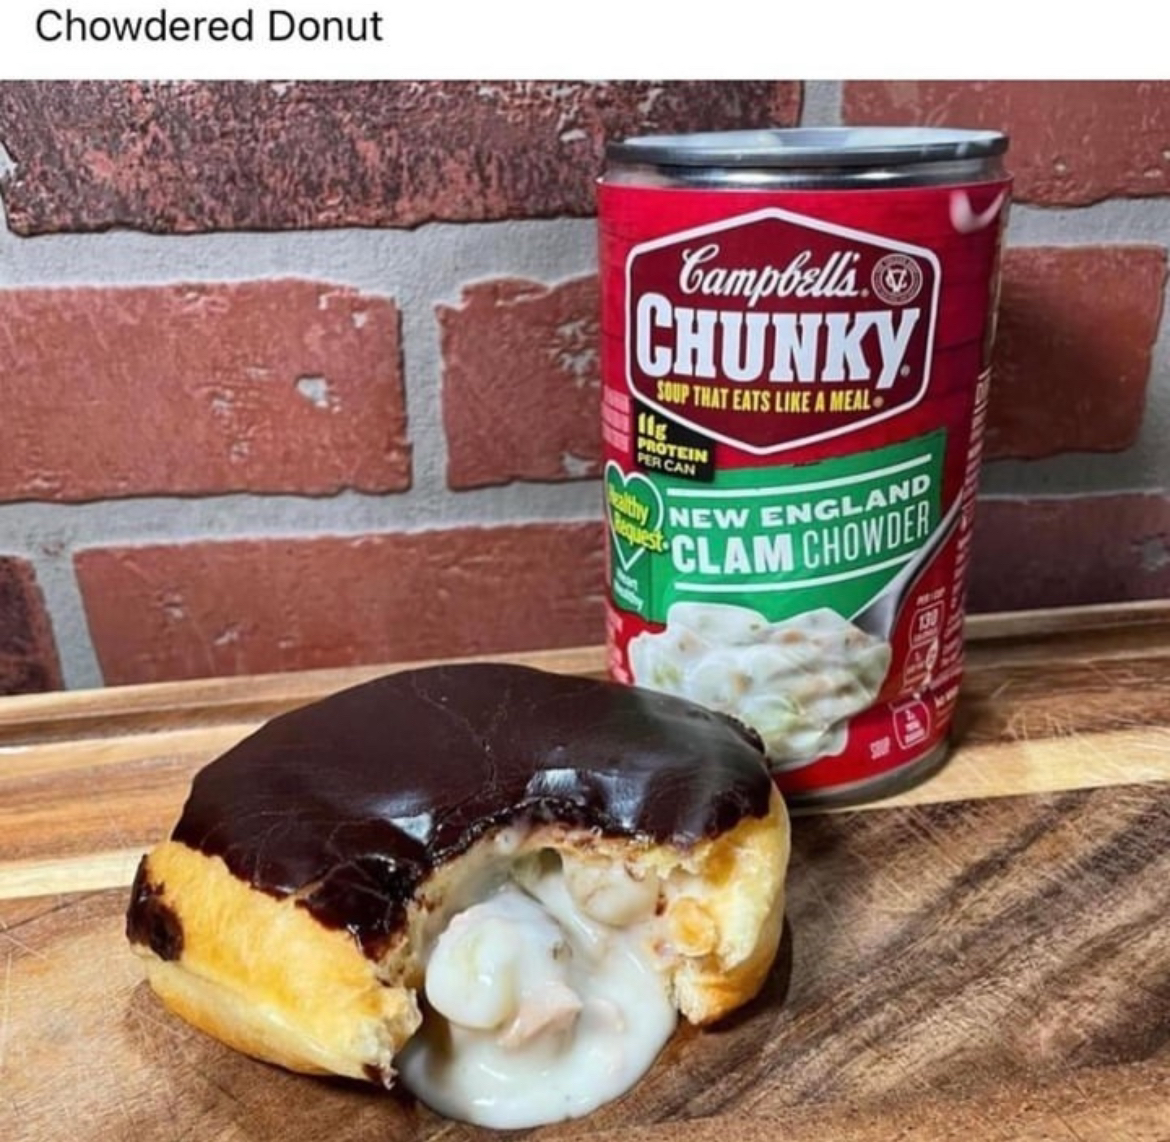 Donut filled with chowder